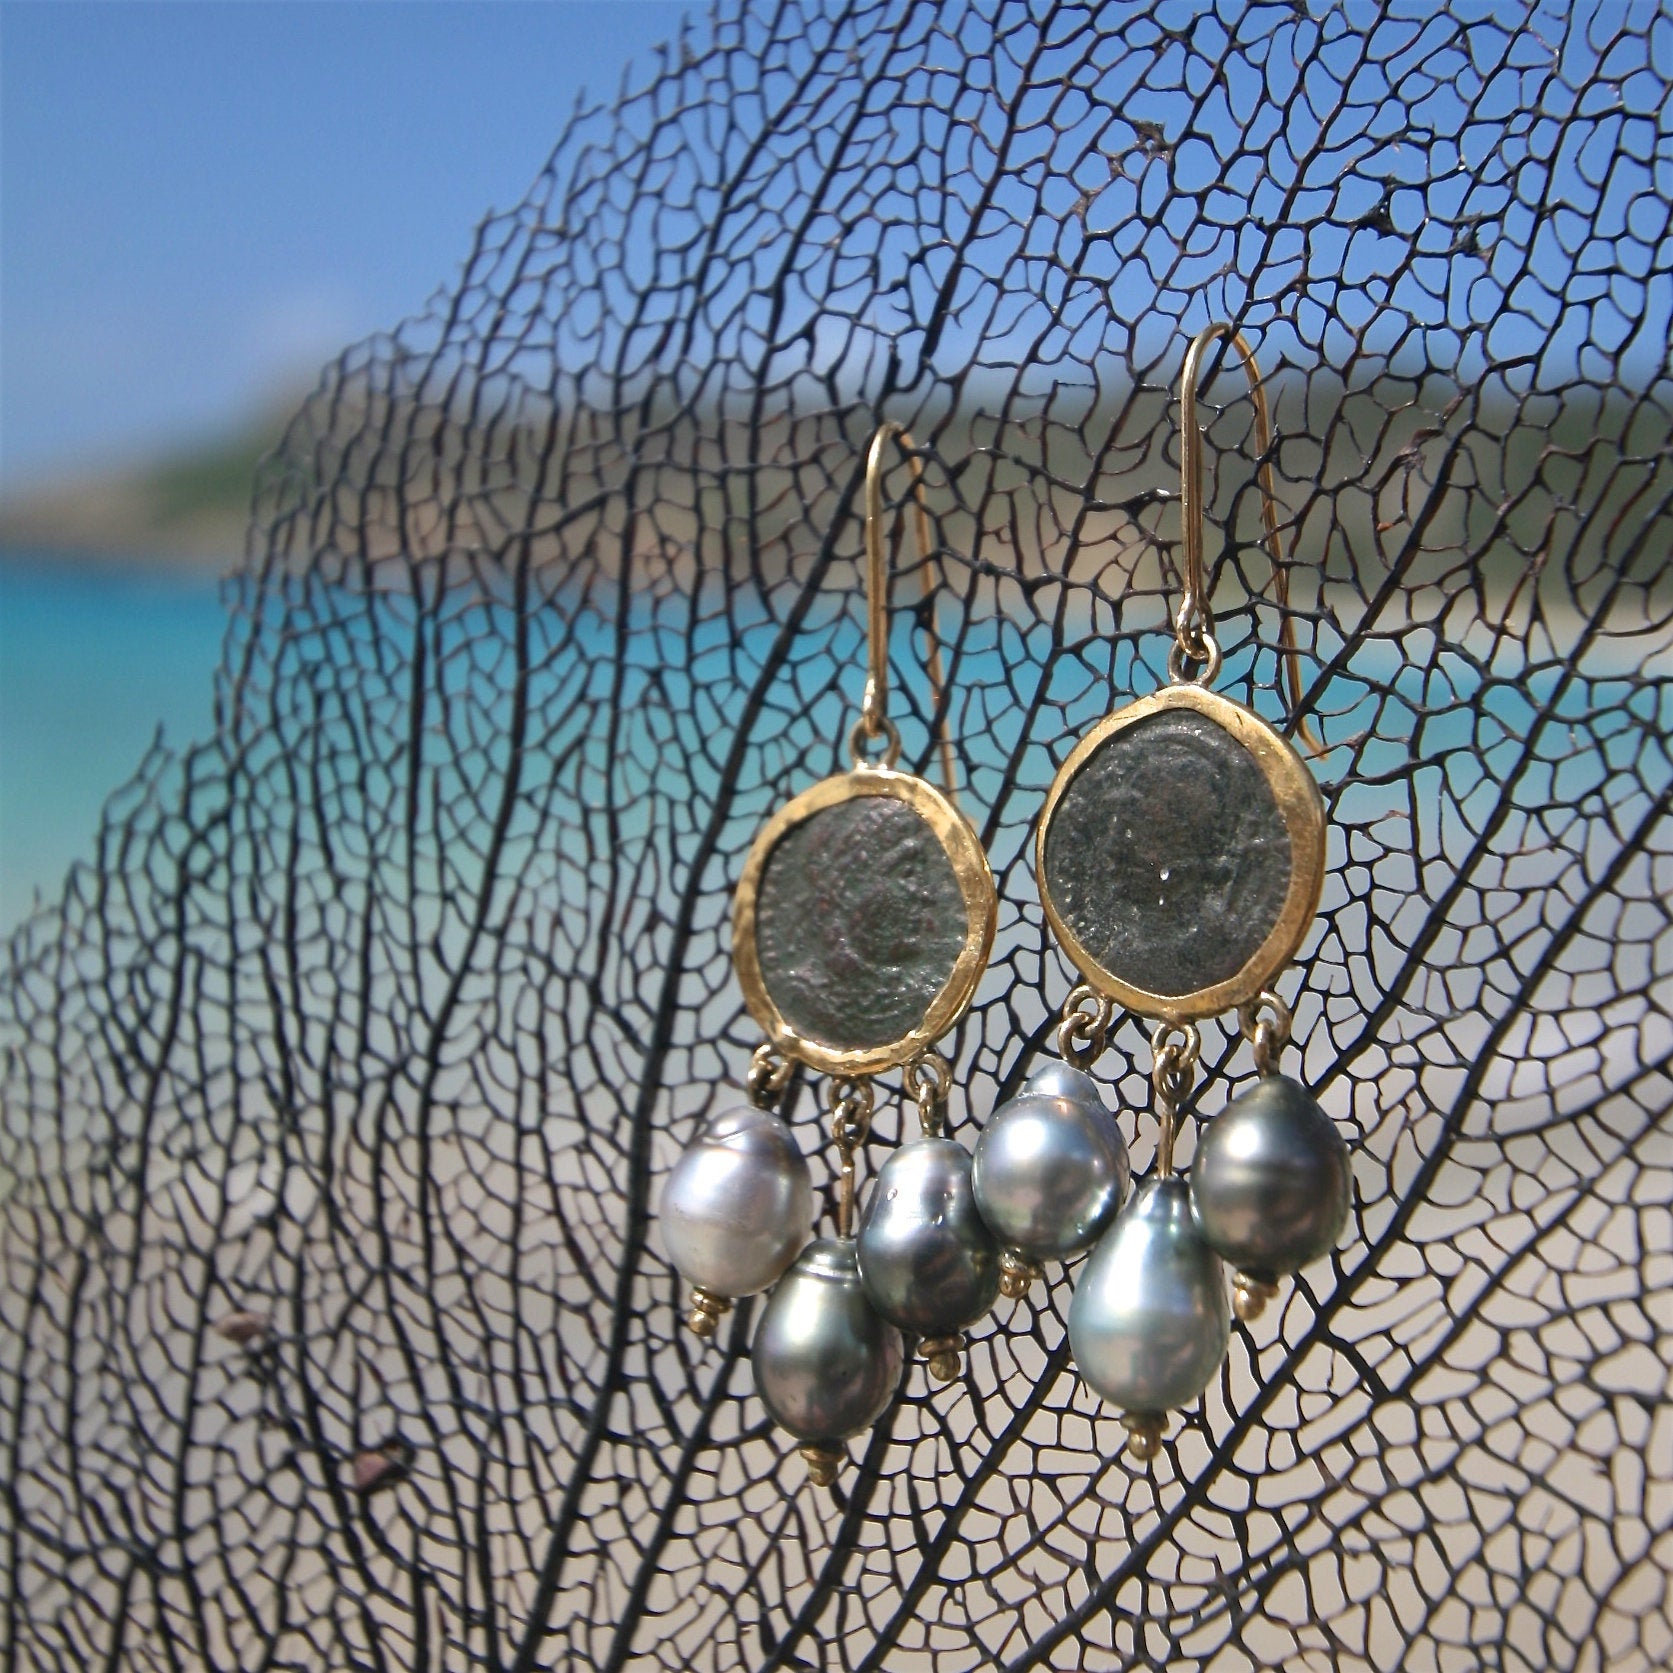 24k Gold earrings with antique Roman coins and Tahitian pearls pendant, 24k bezel and 18k gold hooks, Saint Barthelemy, antique gold jewelry